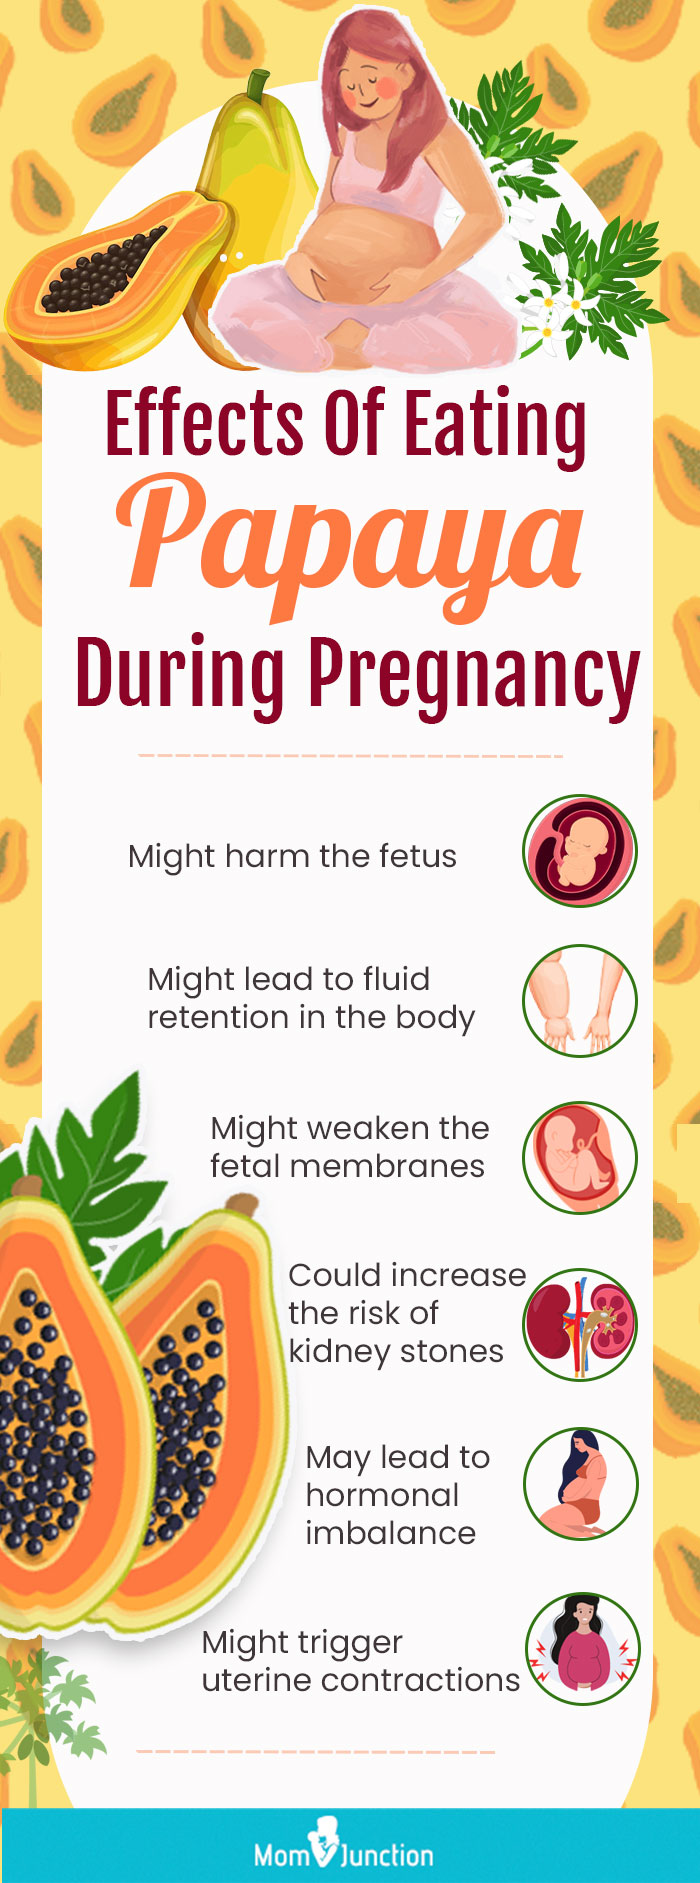 effects of eating papaya during pregnancy (infographic)